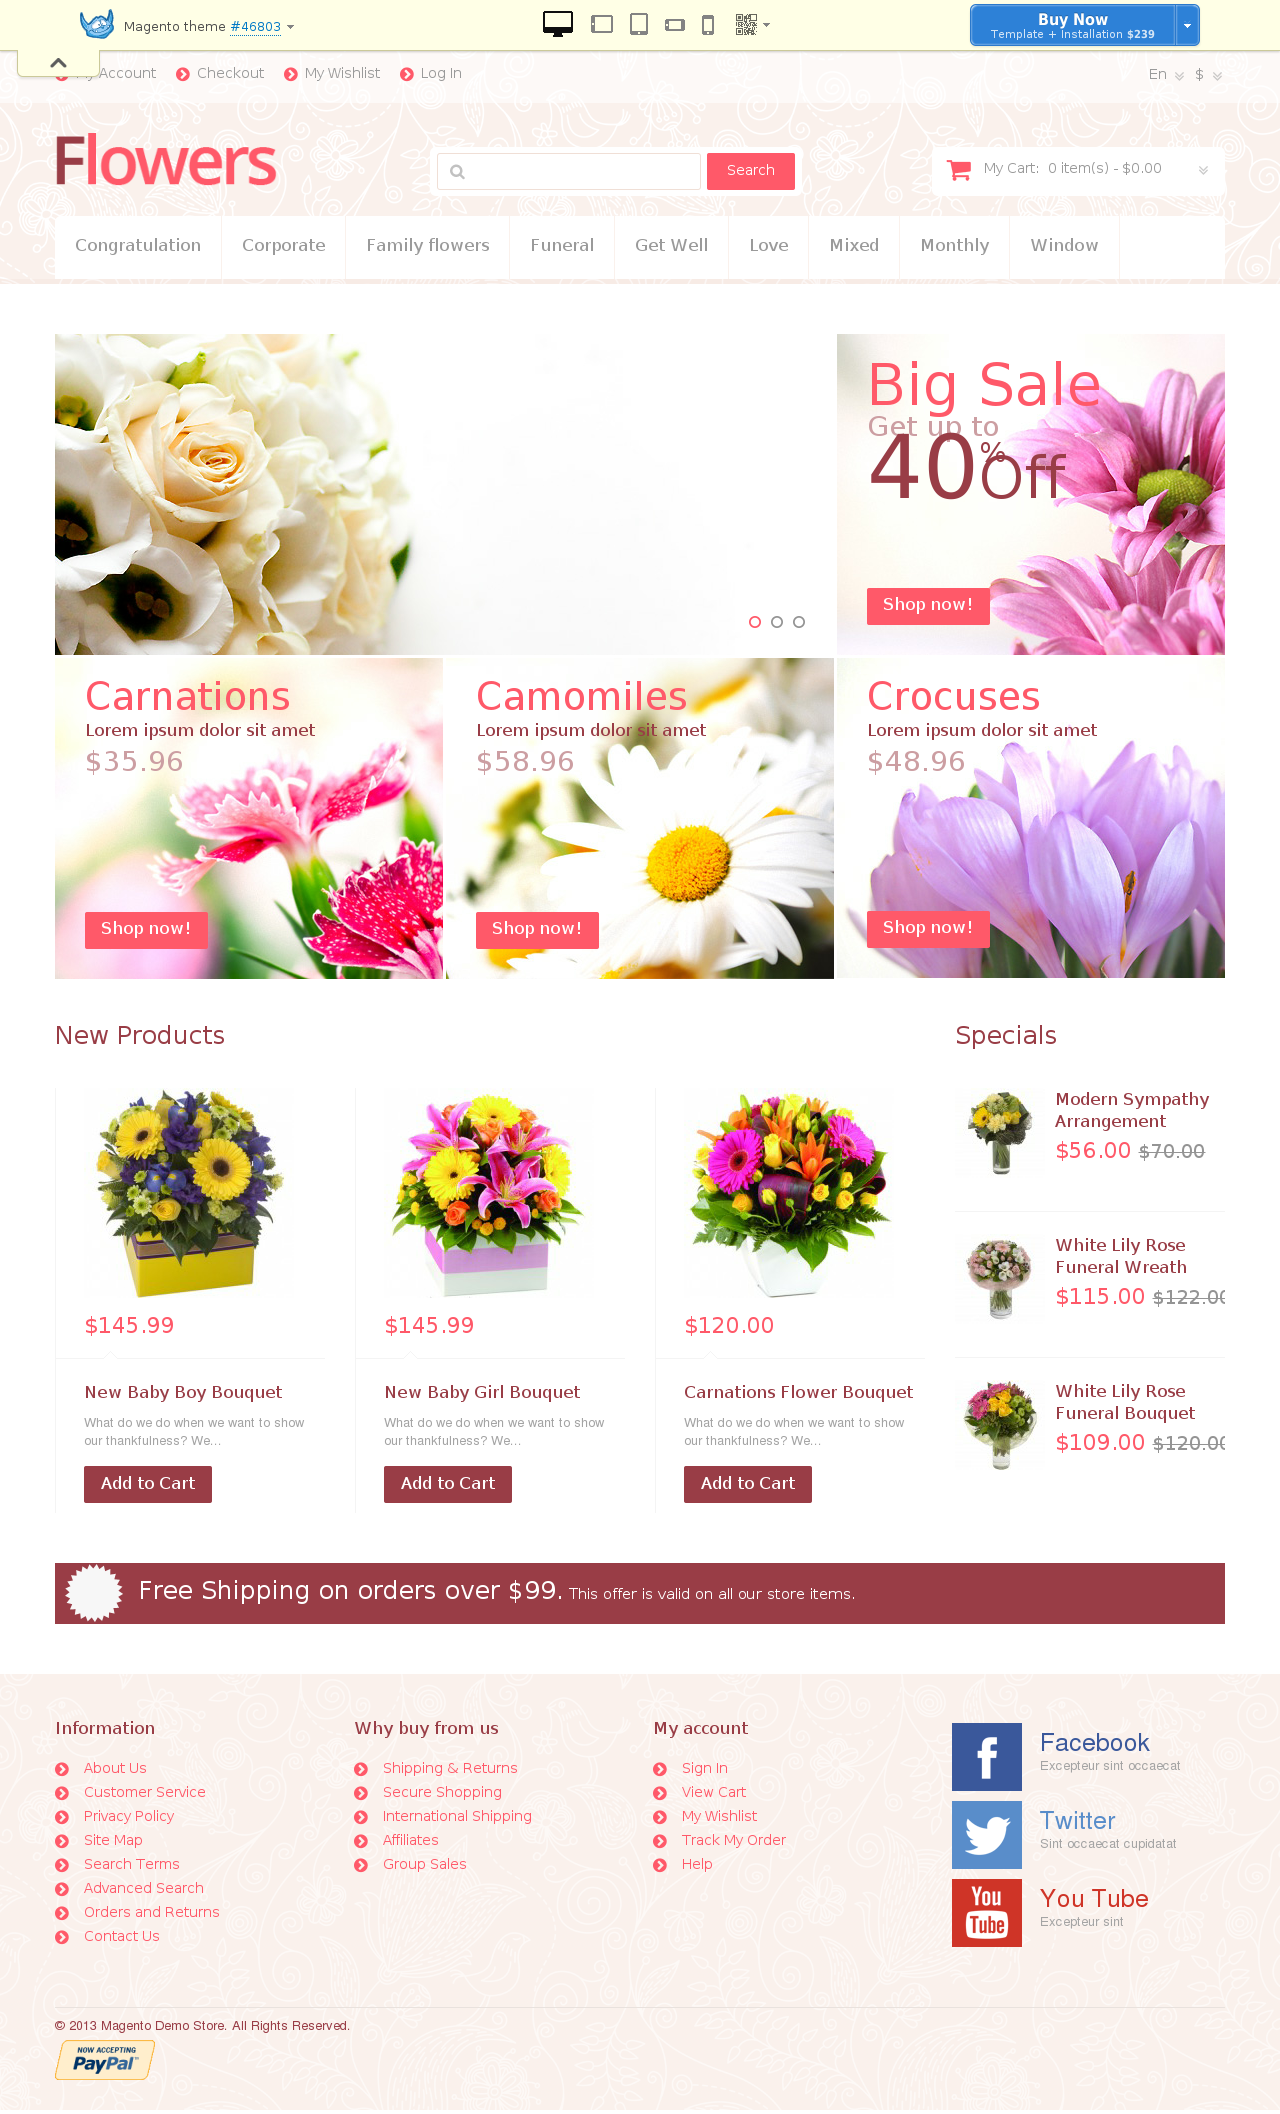 Flowers For Any Occasion Magento Theme #46803